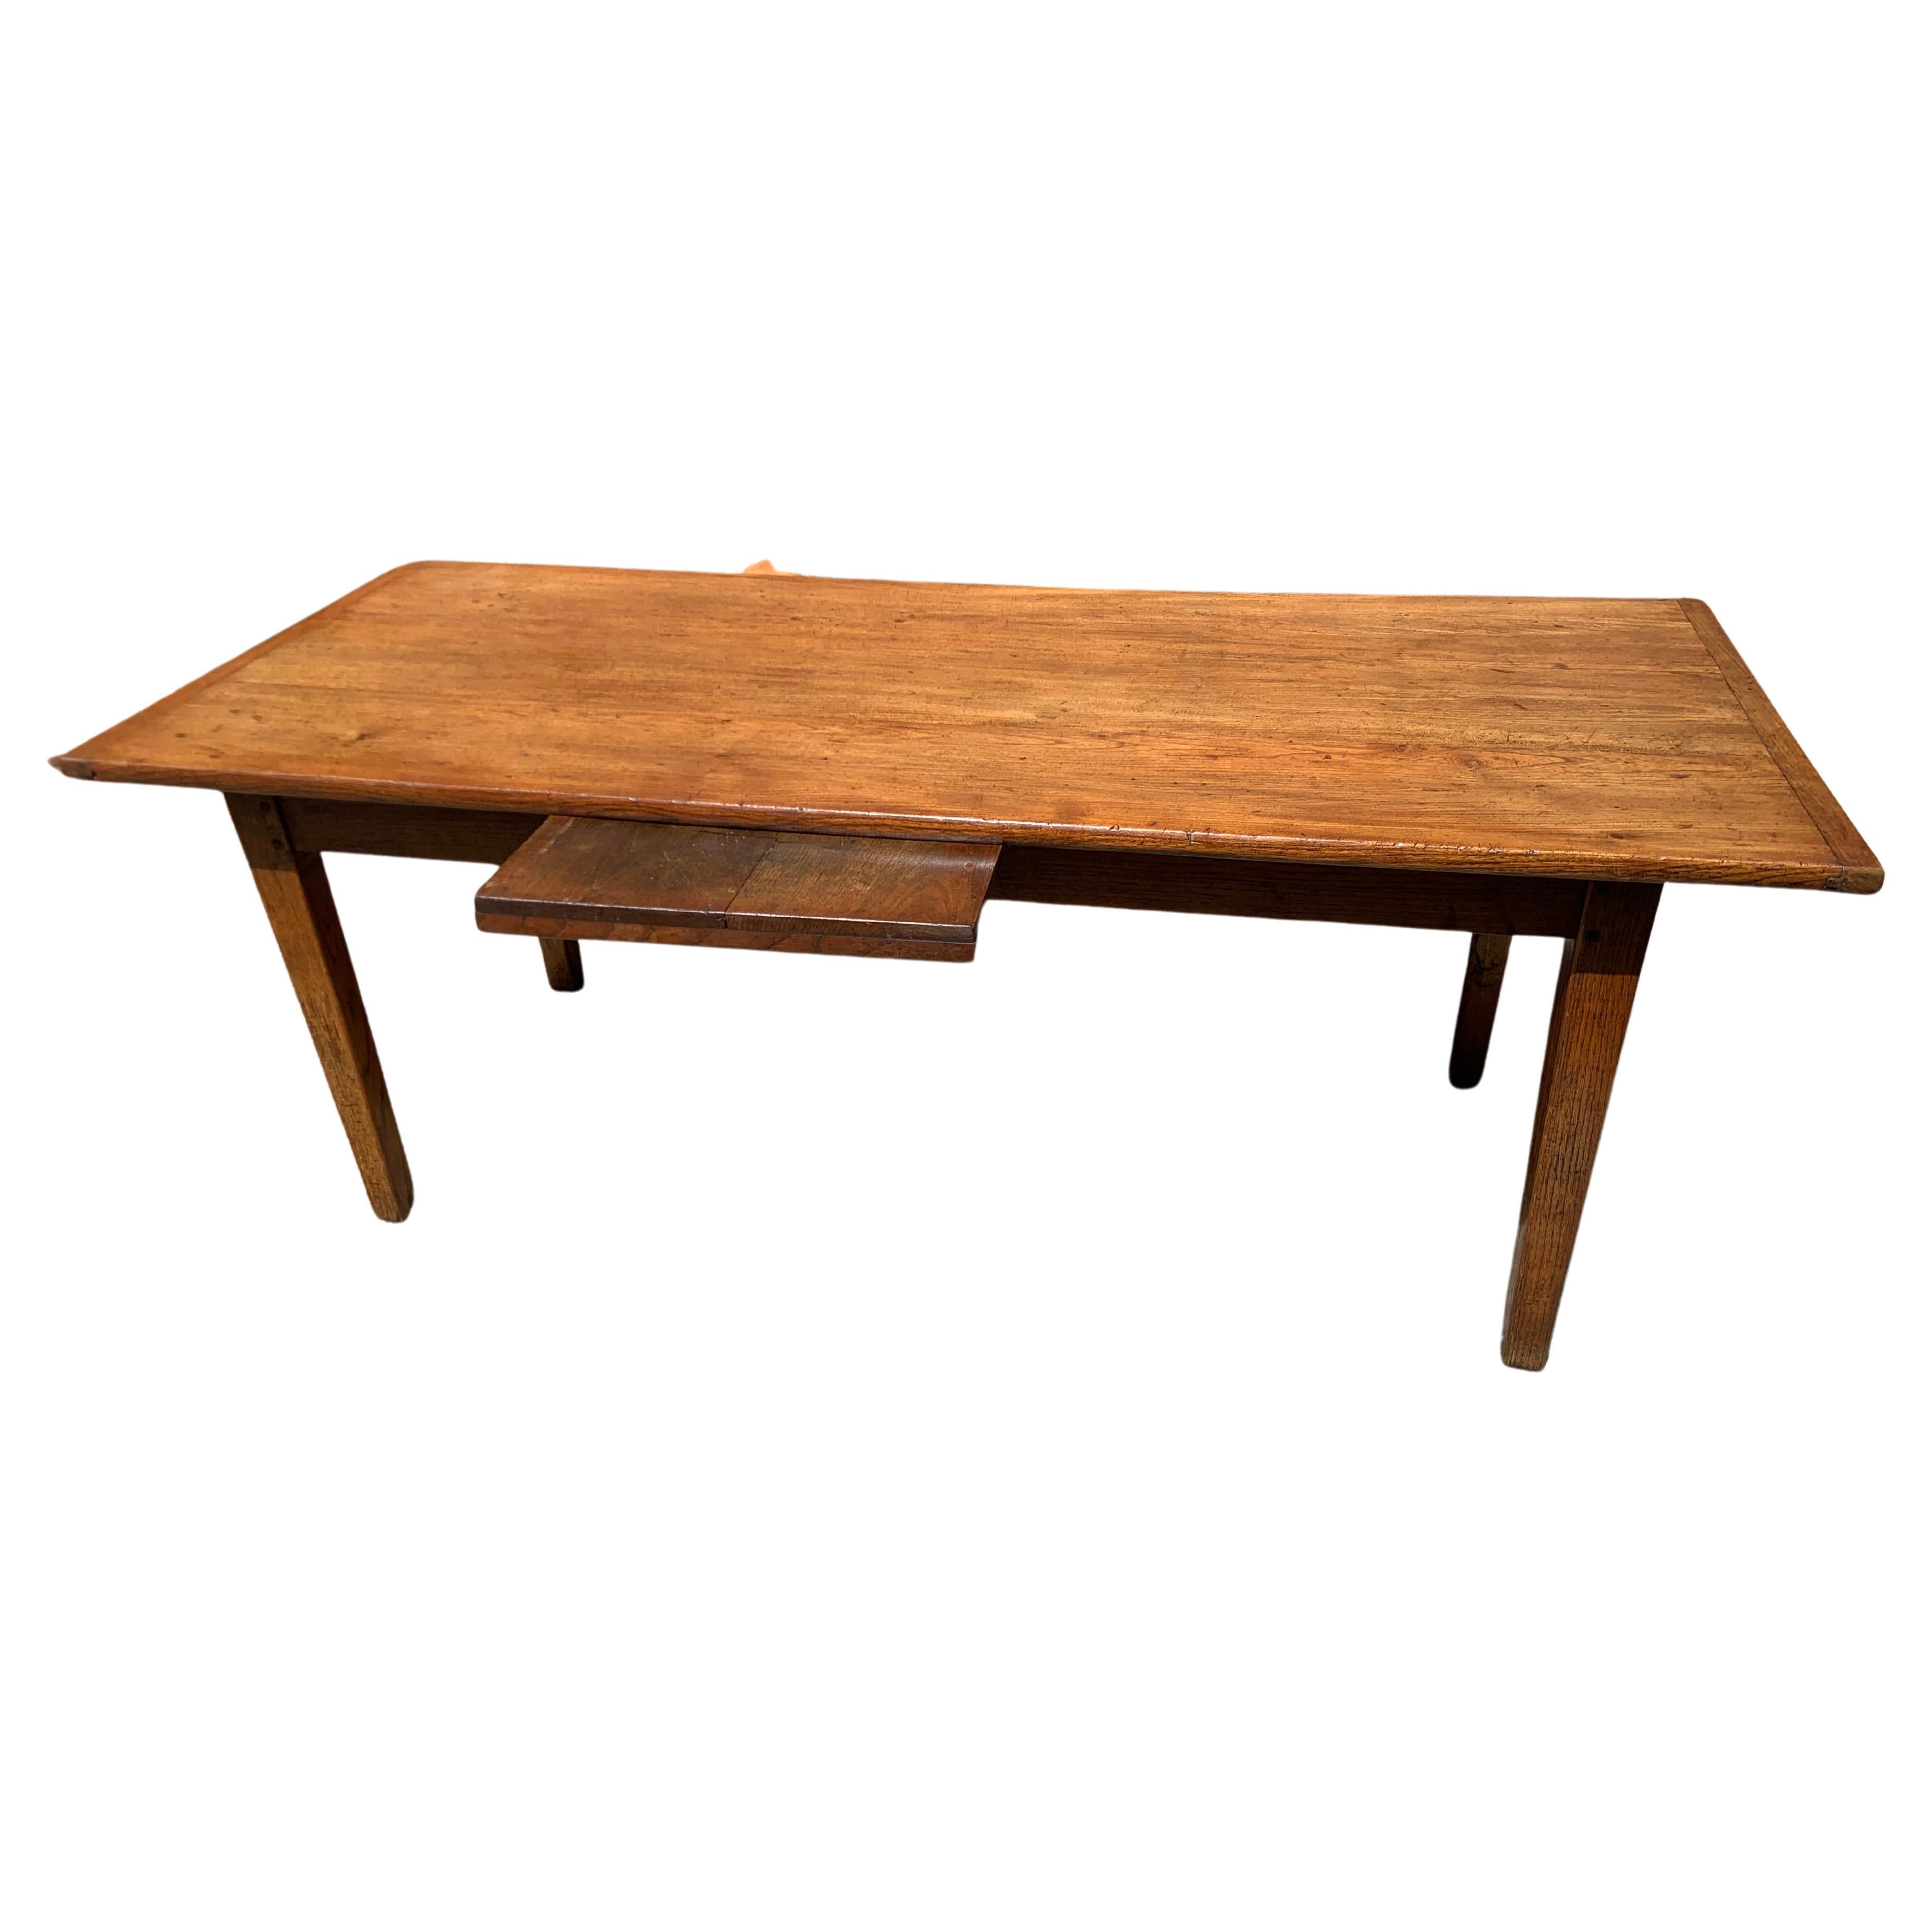 Antique Elm Tapered Leg Dining Table With Bread Slide